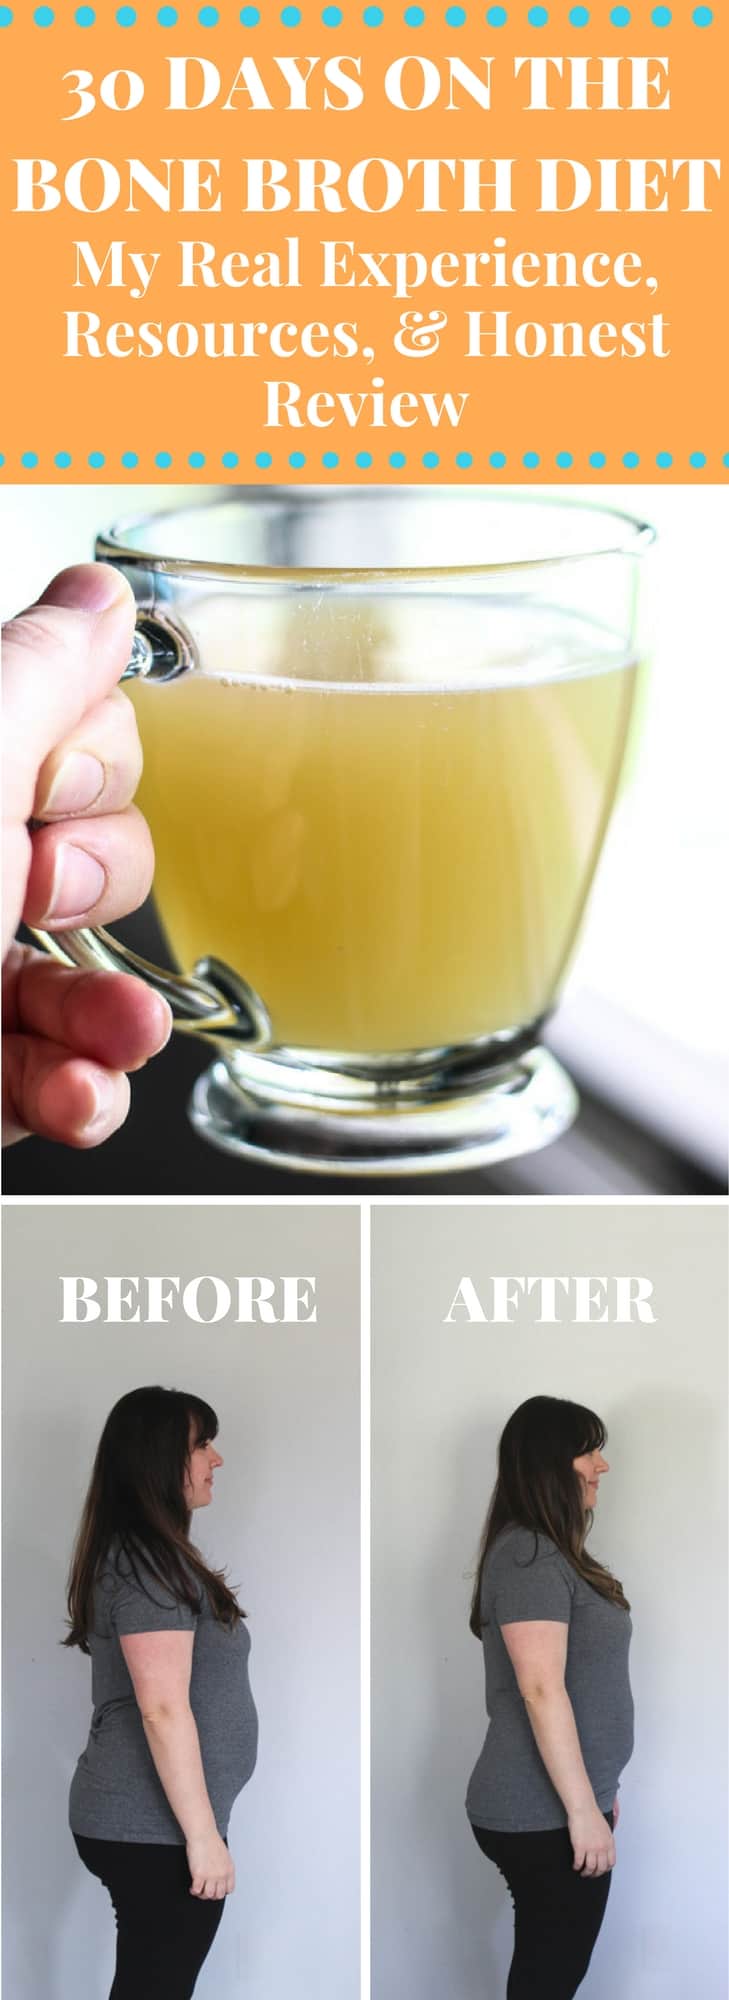 https://www.bessiebakes.com/wp-content/uploads/2018/04/Before-and-after-photos-and-results-bone-broth-diet-pinterest.jpg